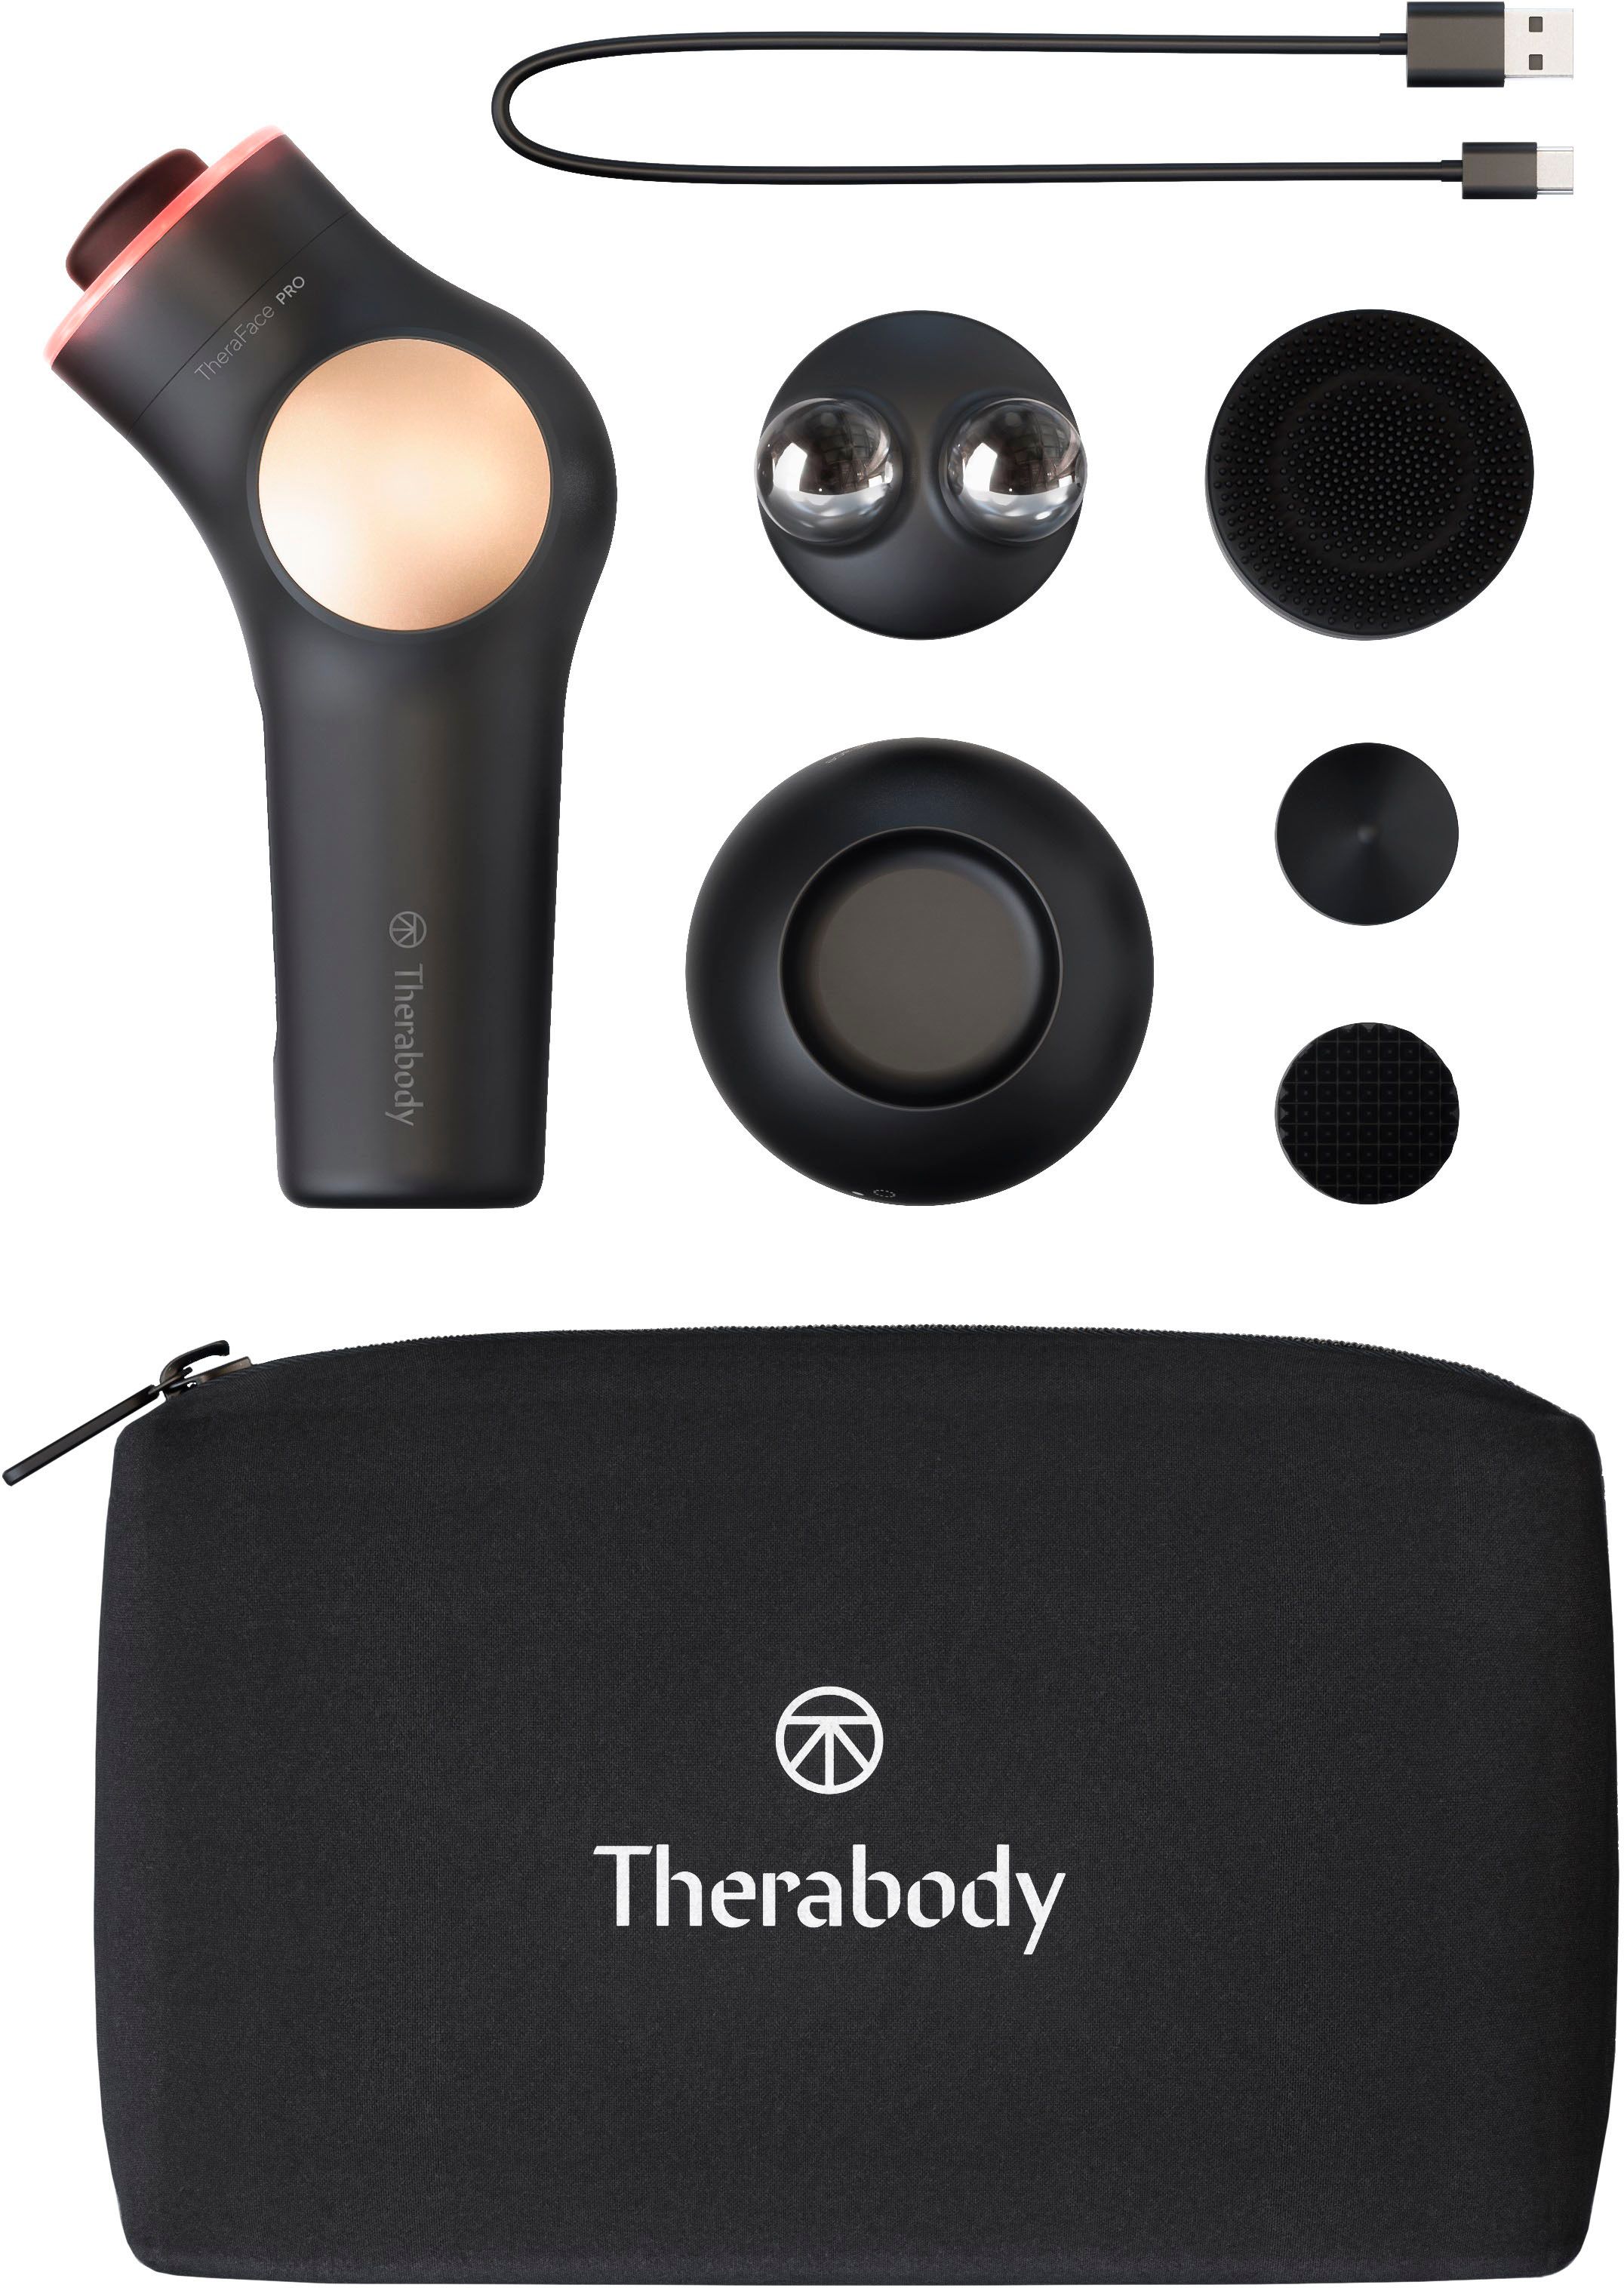 TheraFace PRO (Black) - The ultimate 6-in-1 facial health device